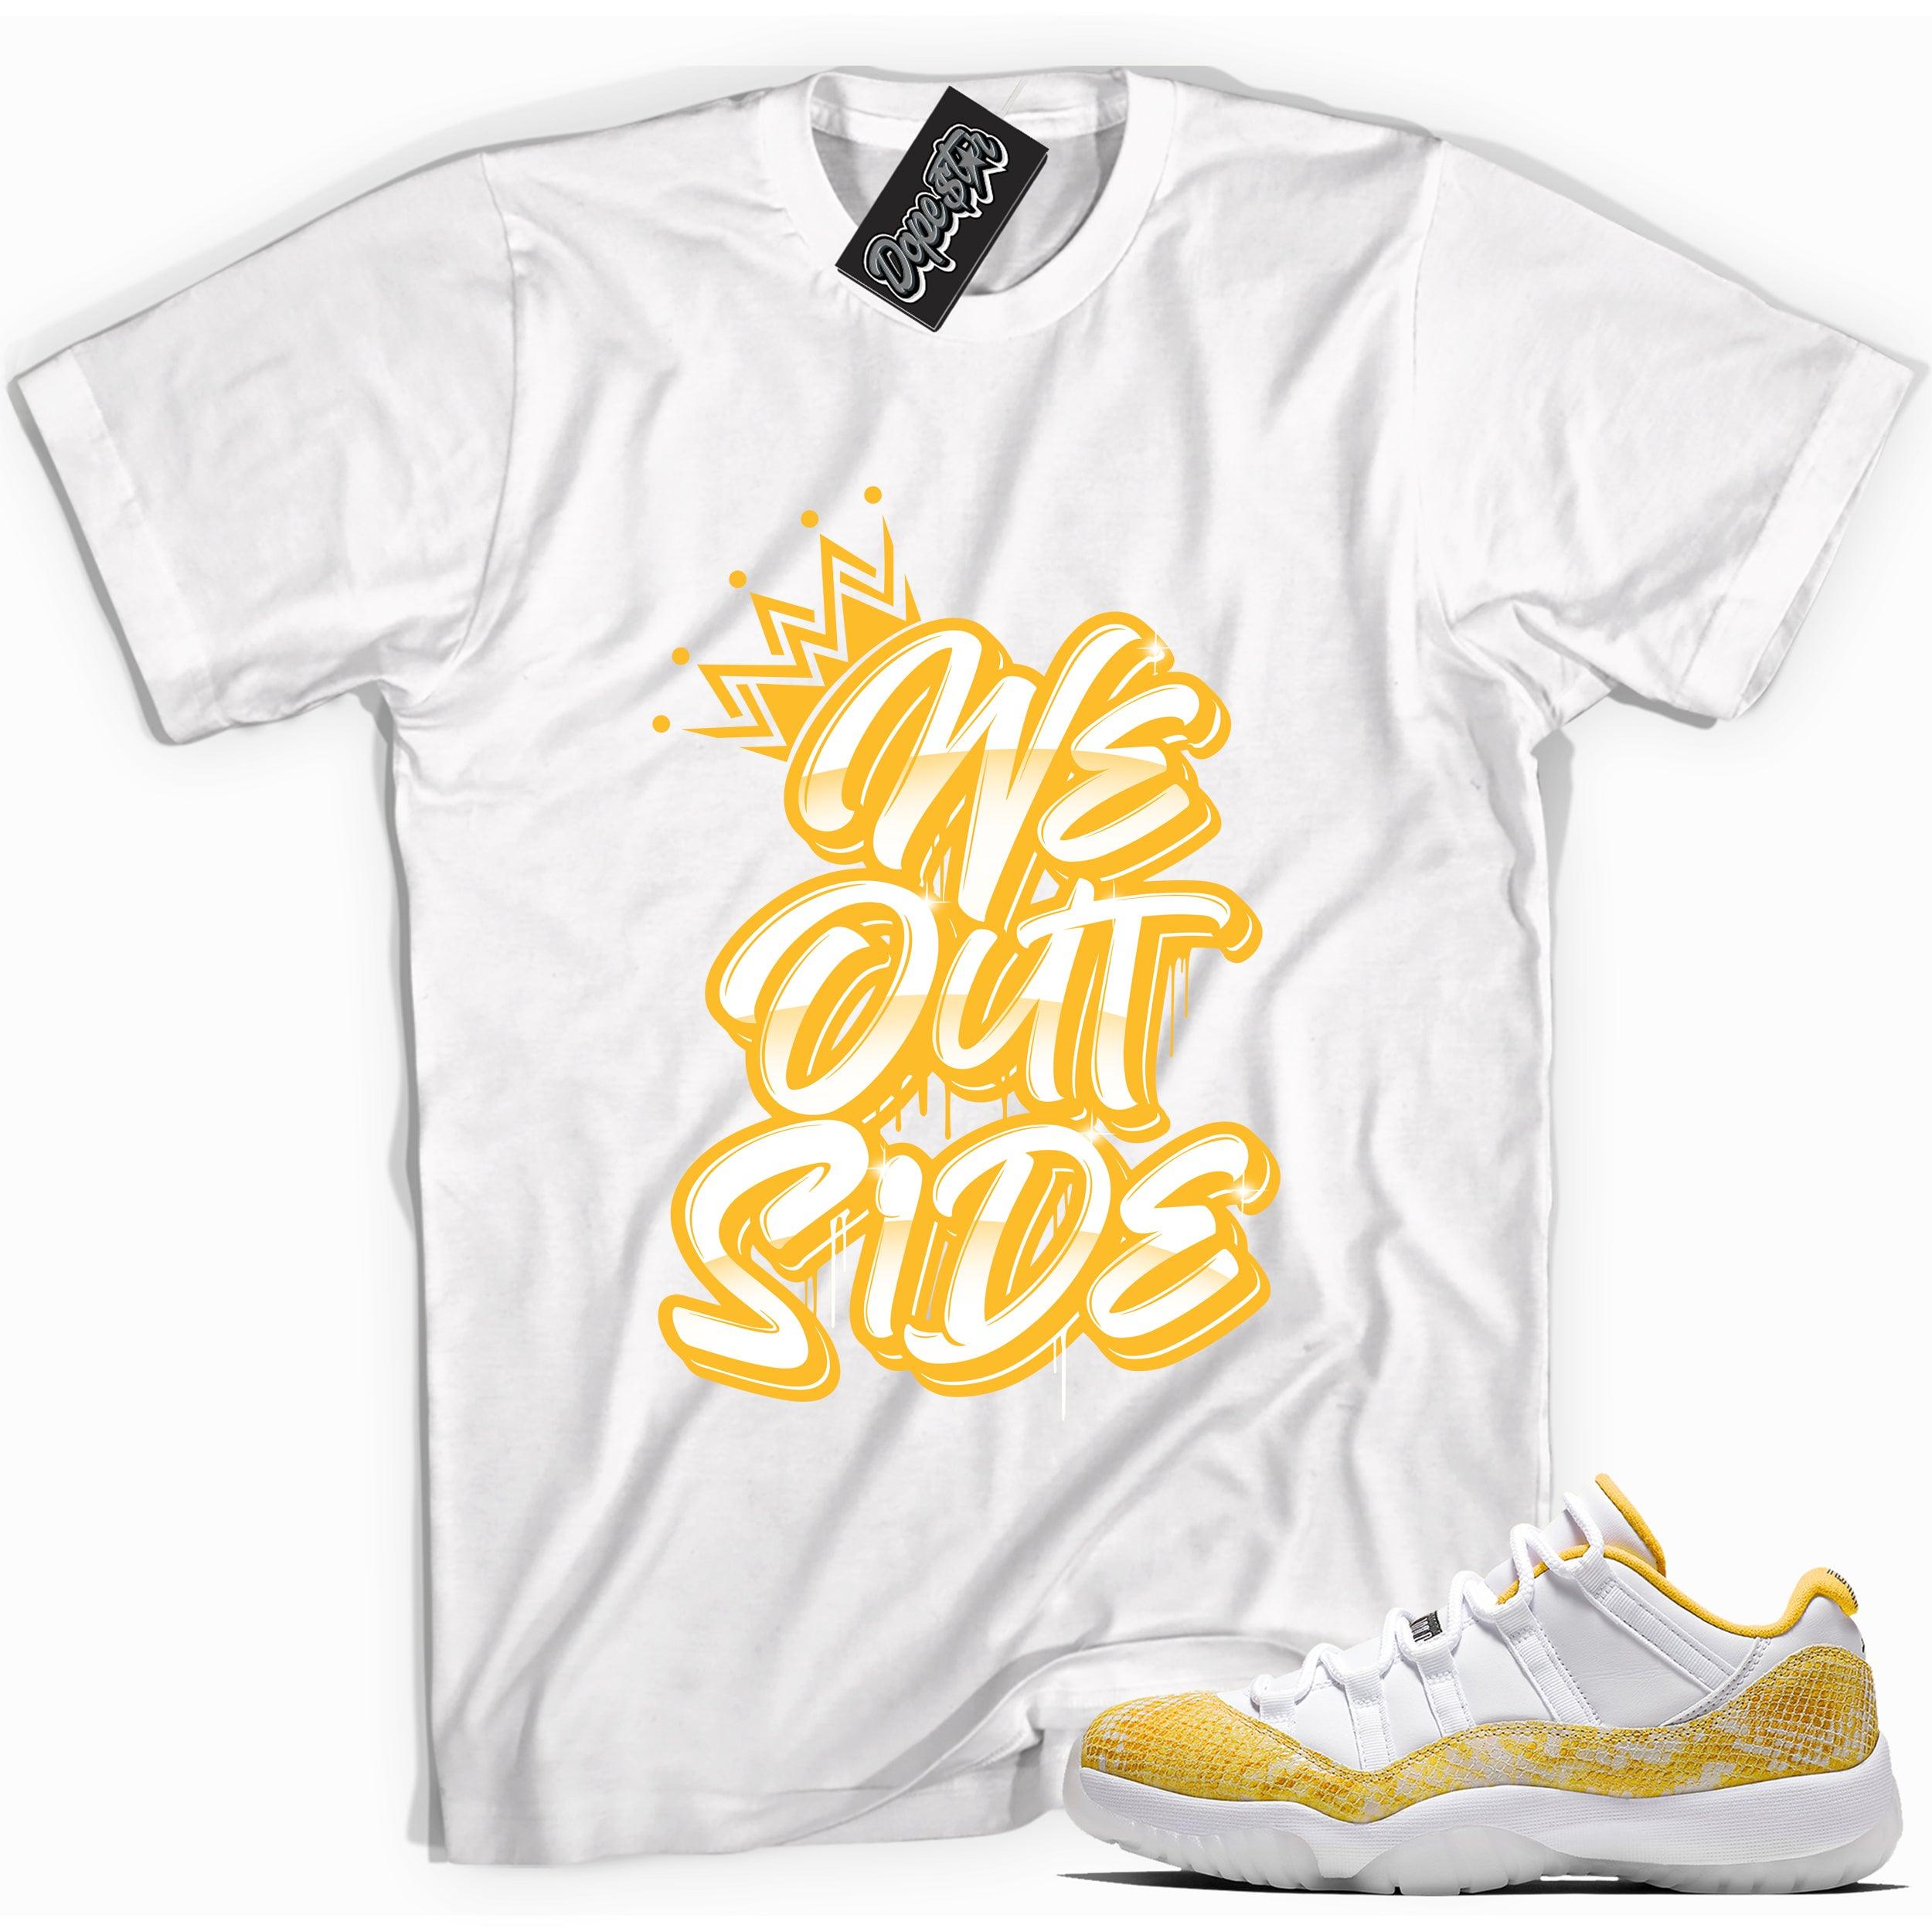 Cool white graphic tee with 'we outside' print, that perfectly matches Air Jordan 11 Retro Low Yellow Snakeskin sneakers